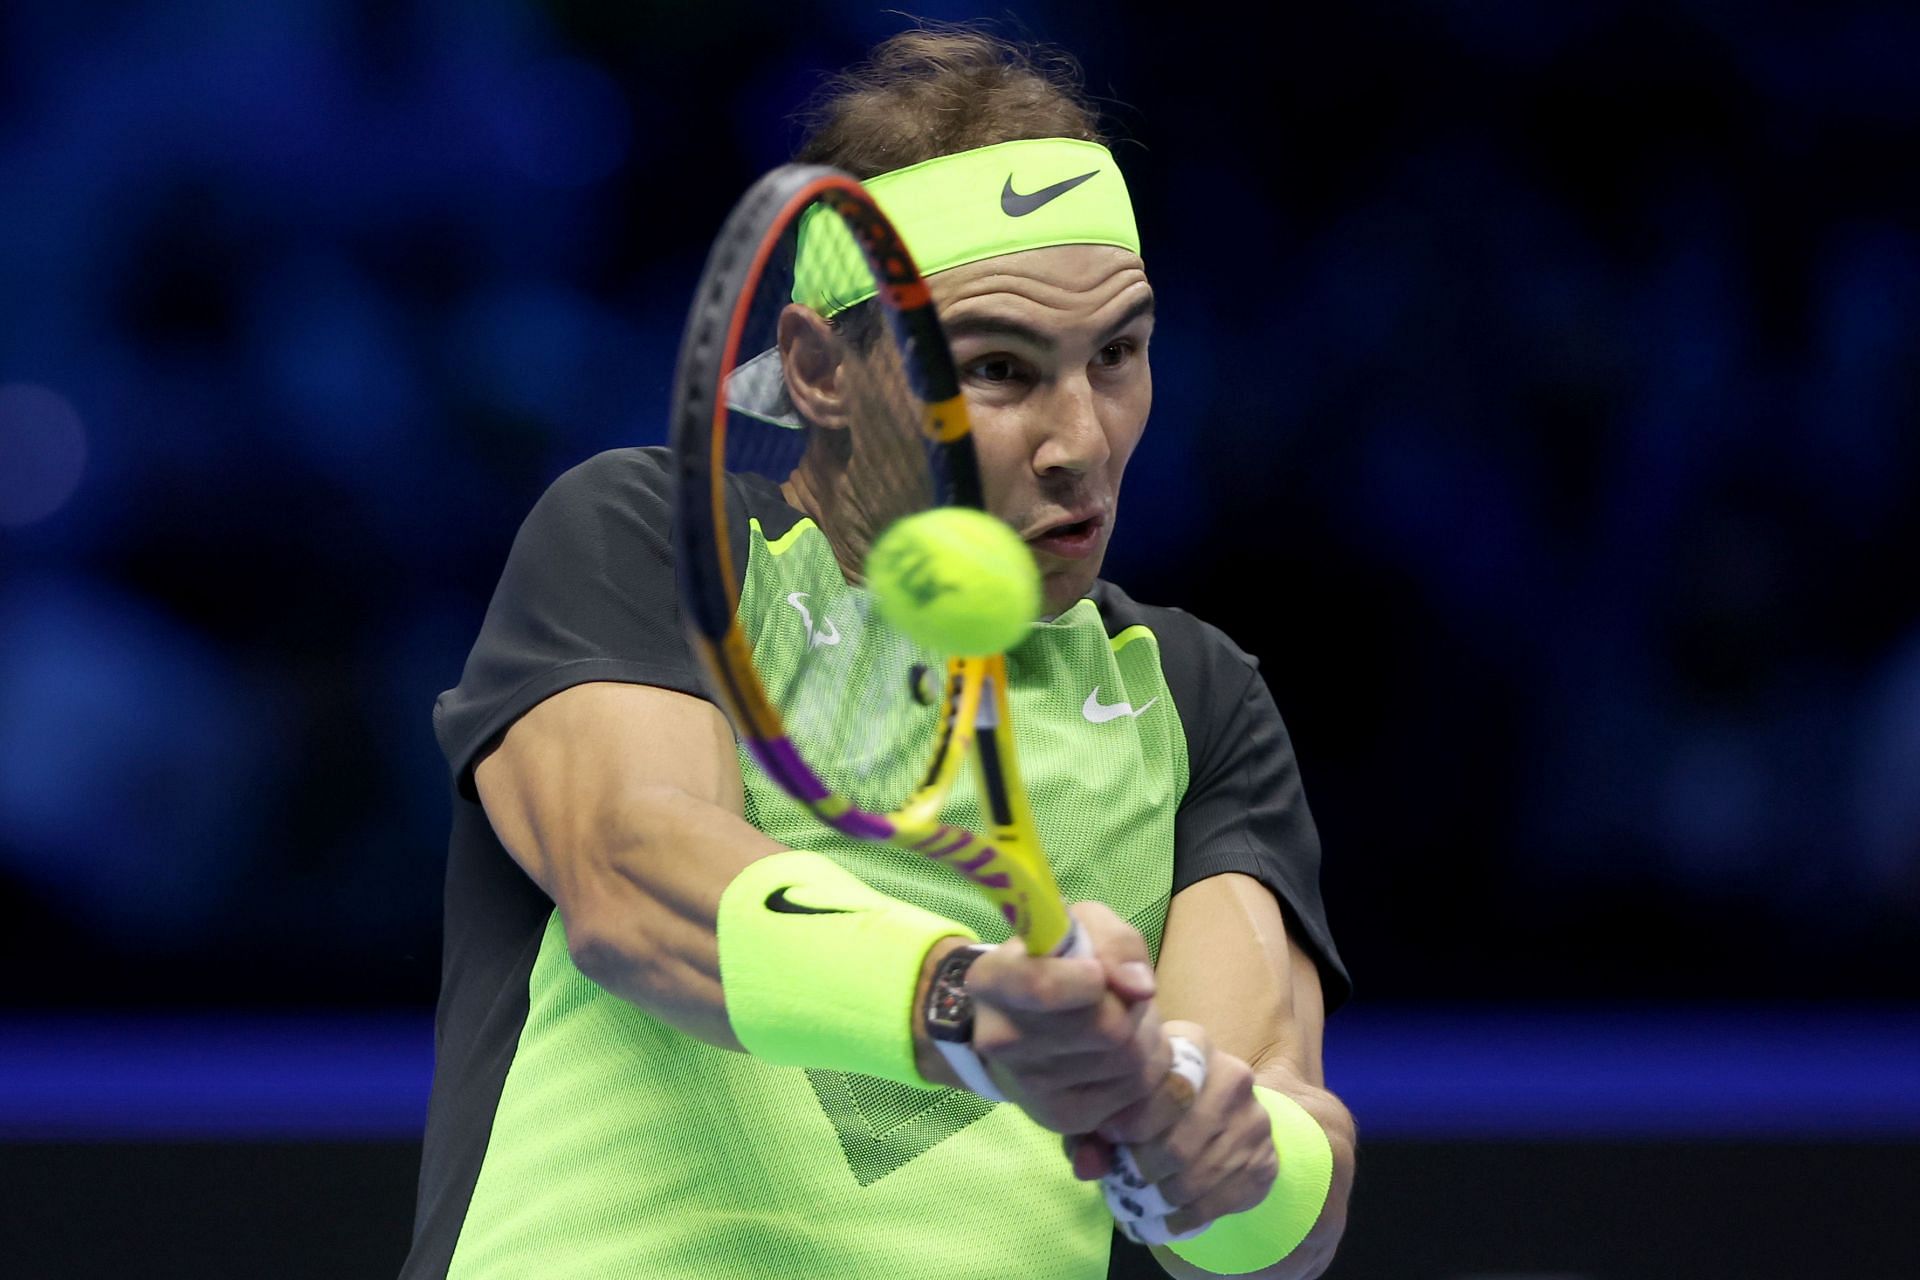 Rafael Nadal in action against Taylor Fritz at the 2022 ATP Finals in Turin.